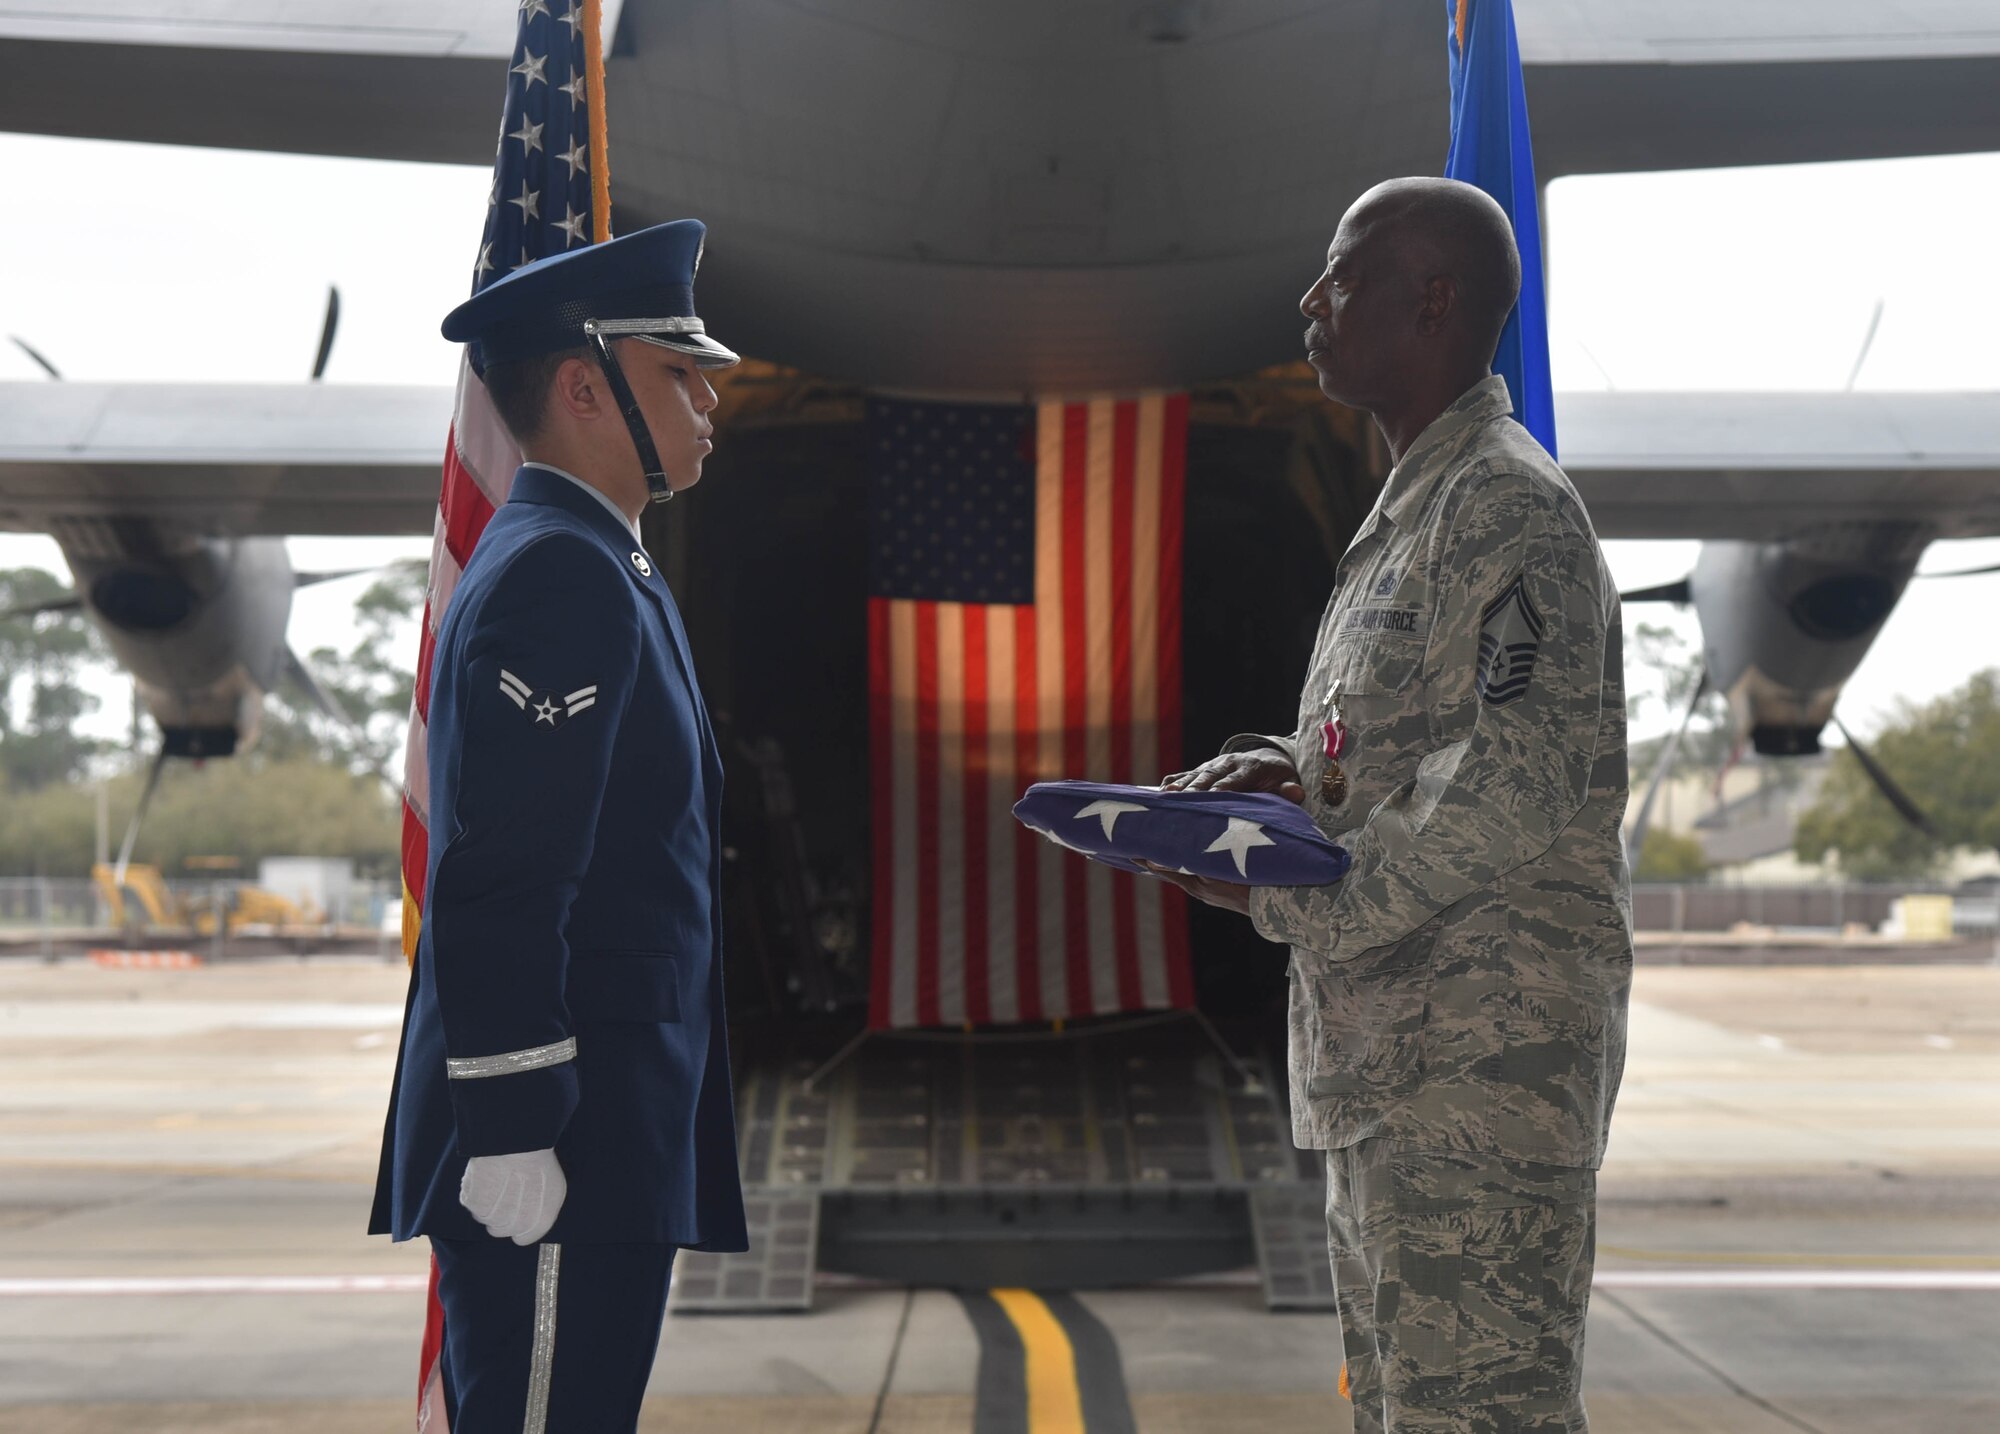 Senior Master Sgt. Charles Moore, 803rd Aircraft Maintenance Squadron production superintendent, accepts folded U.S. flag from an Honor Guard Airman during Moore's retirement ceremony, March 8, 2019.  Moore offiicially retires from his duties after serving 33-years in the Air Force Reserve, April 1, 2019. (U.S. Air Force photo by Tech. Sgt. Michael Farrar)